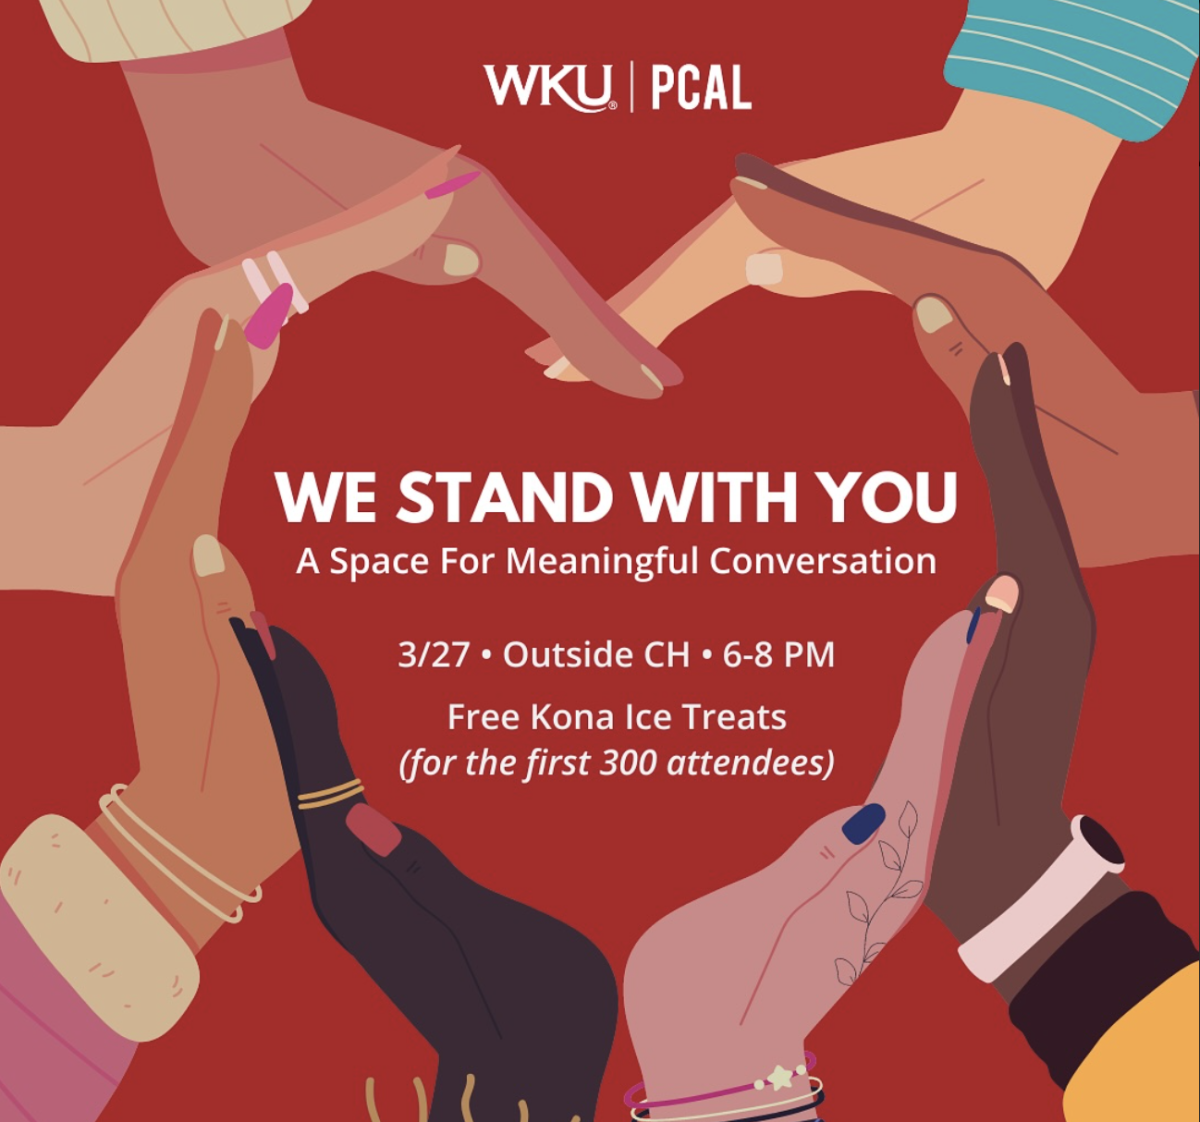 WKU PCAL to host ‘We Stand With You’